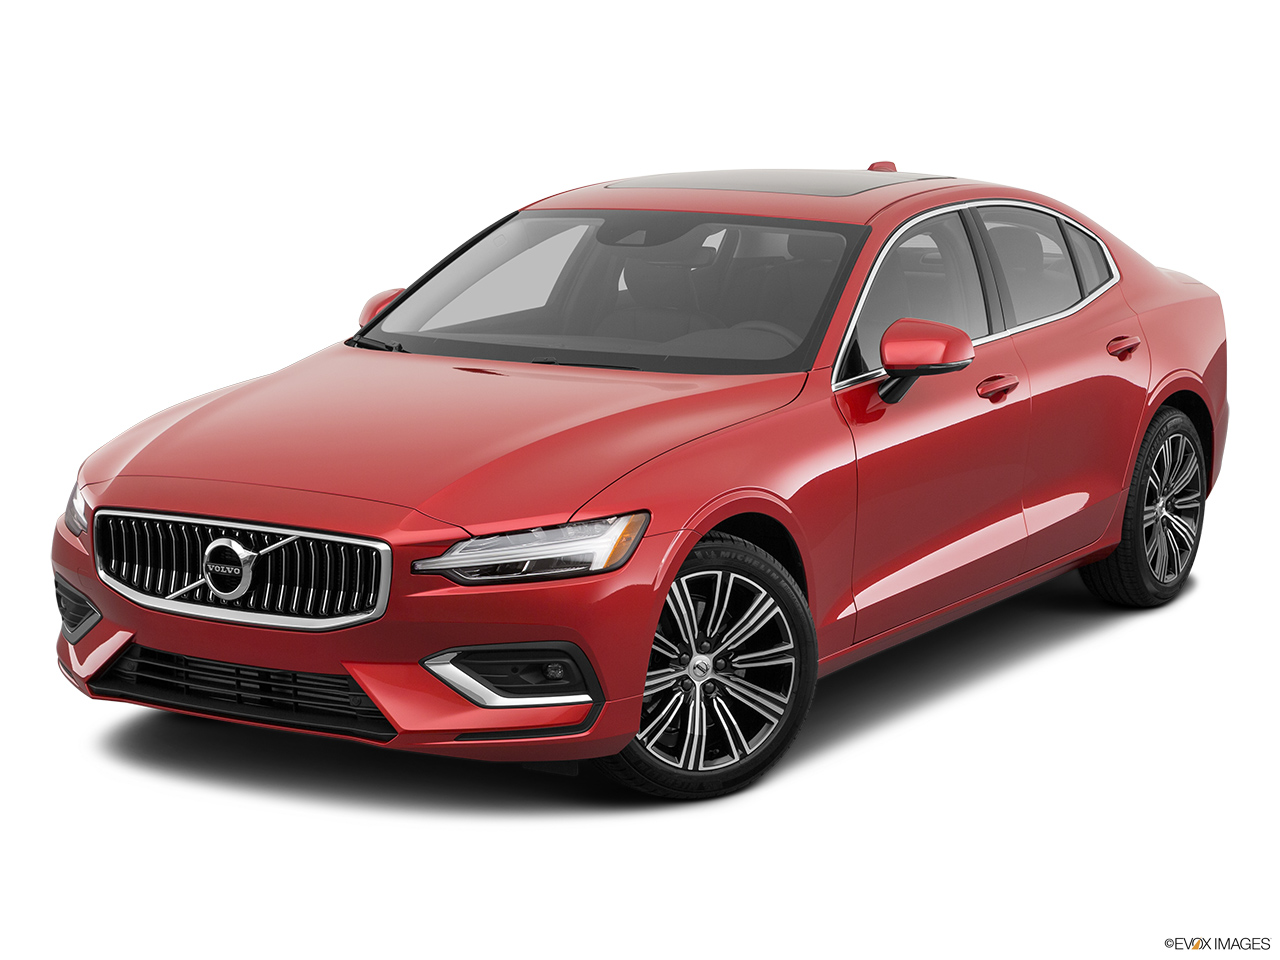 2020 Volvo S60 T5 Inscription Front angle view. 